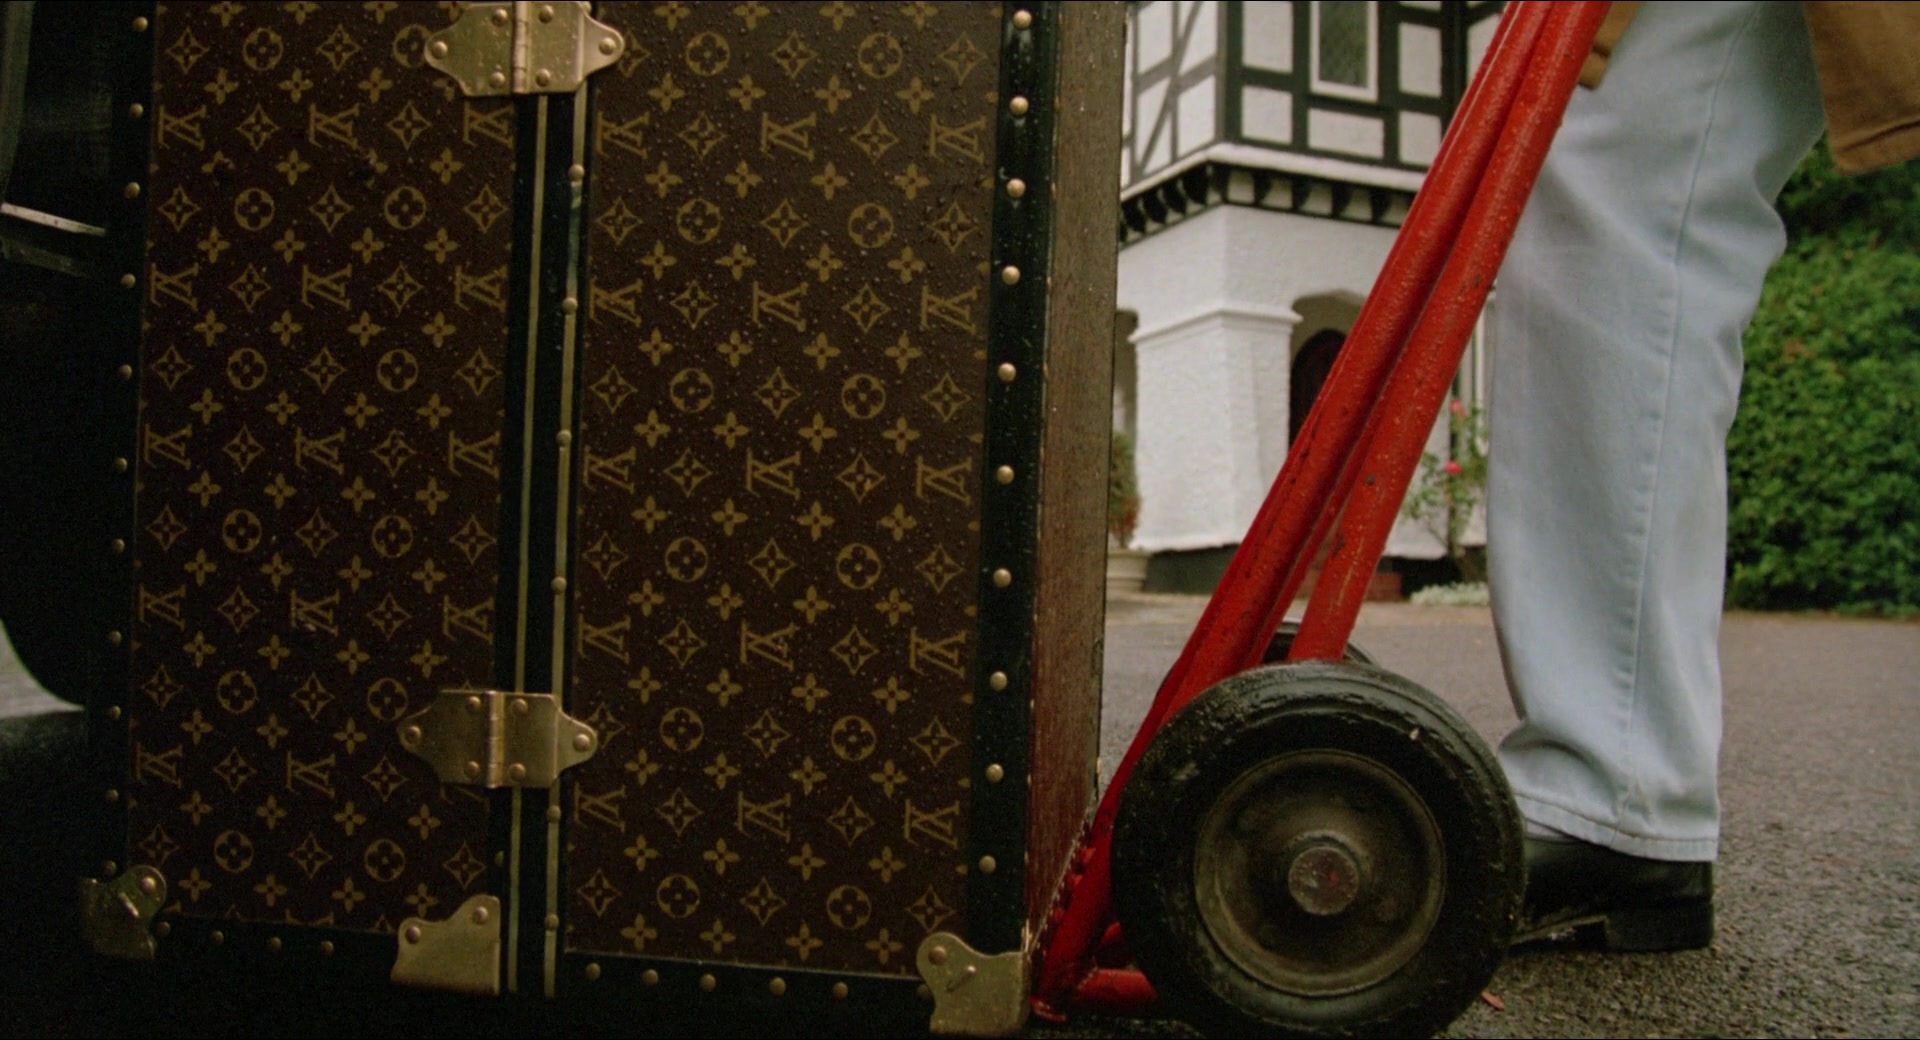 Louis Vuitton Luggage And Bags In The Witches (1990)